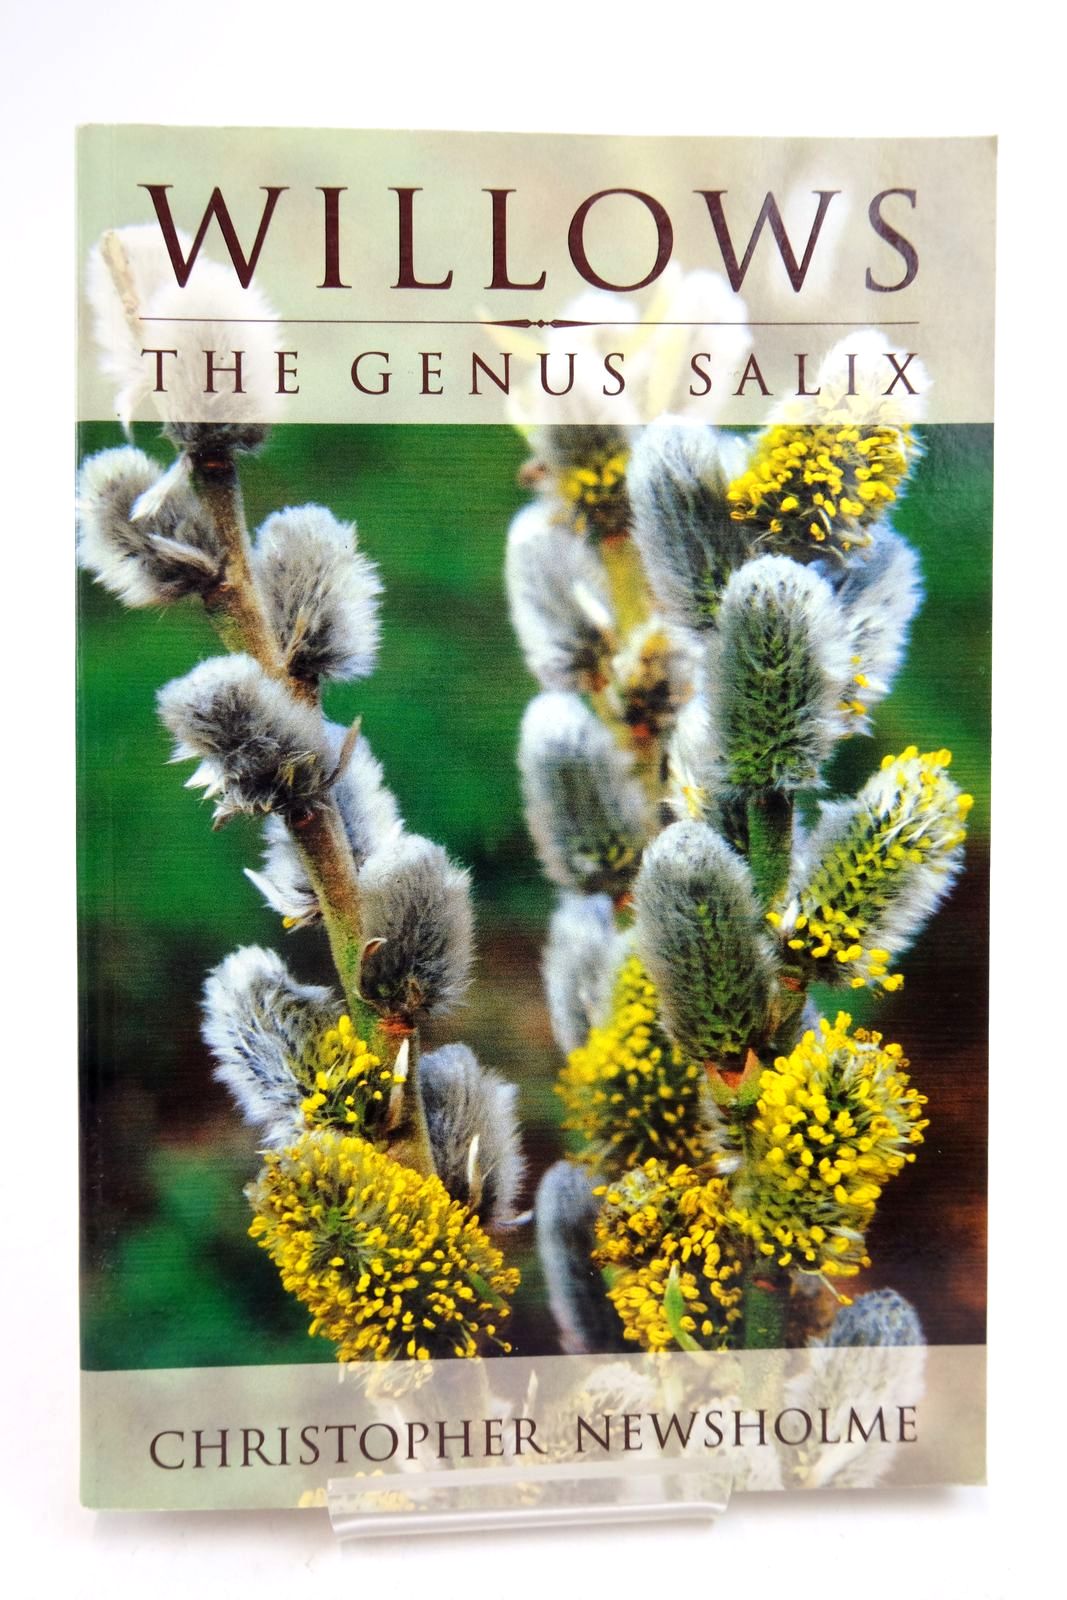 Photo of WILLOWS: THE GENUS SALIX written by Newsholme, Christopher published by B.T. Batsford Ltd. (STOCK CODE: 2139625)  for sale by Stella & Rose's Books